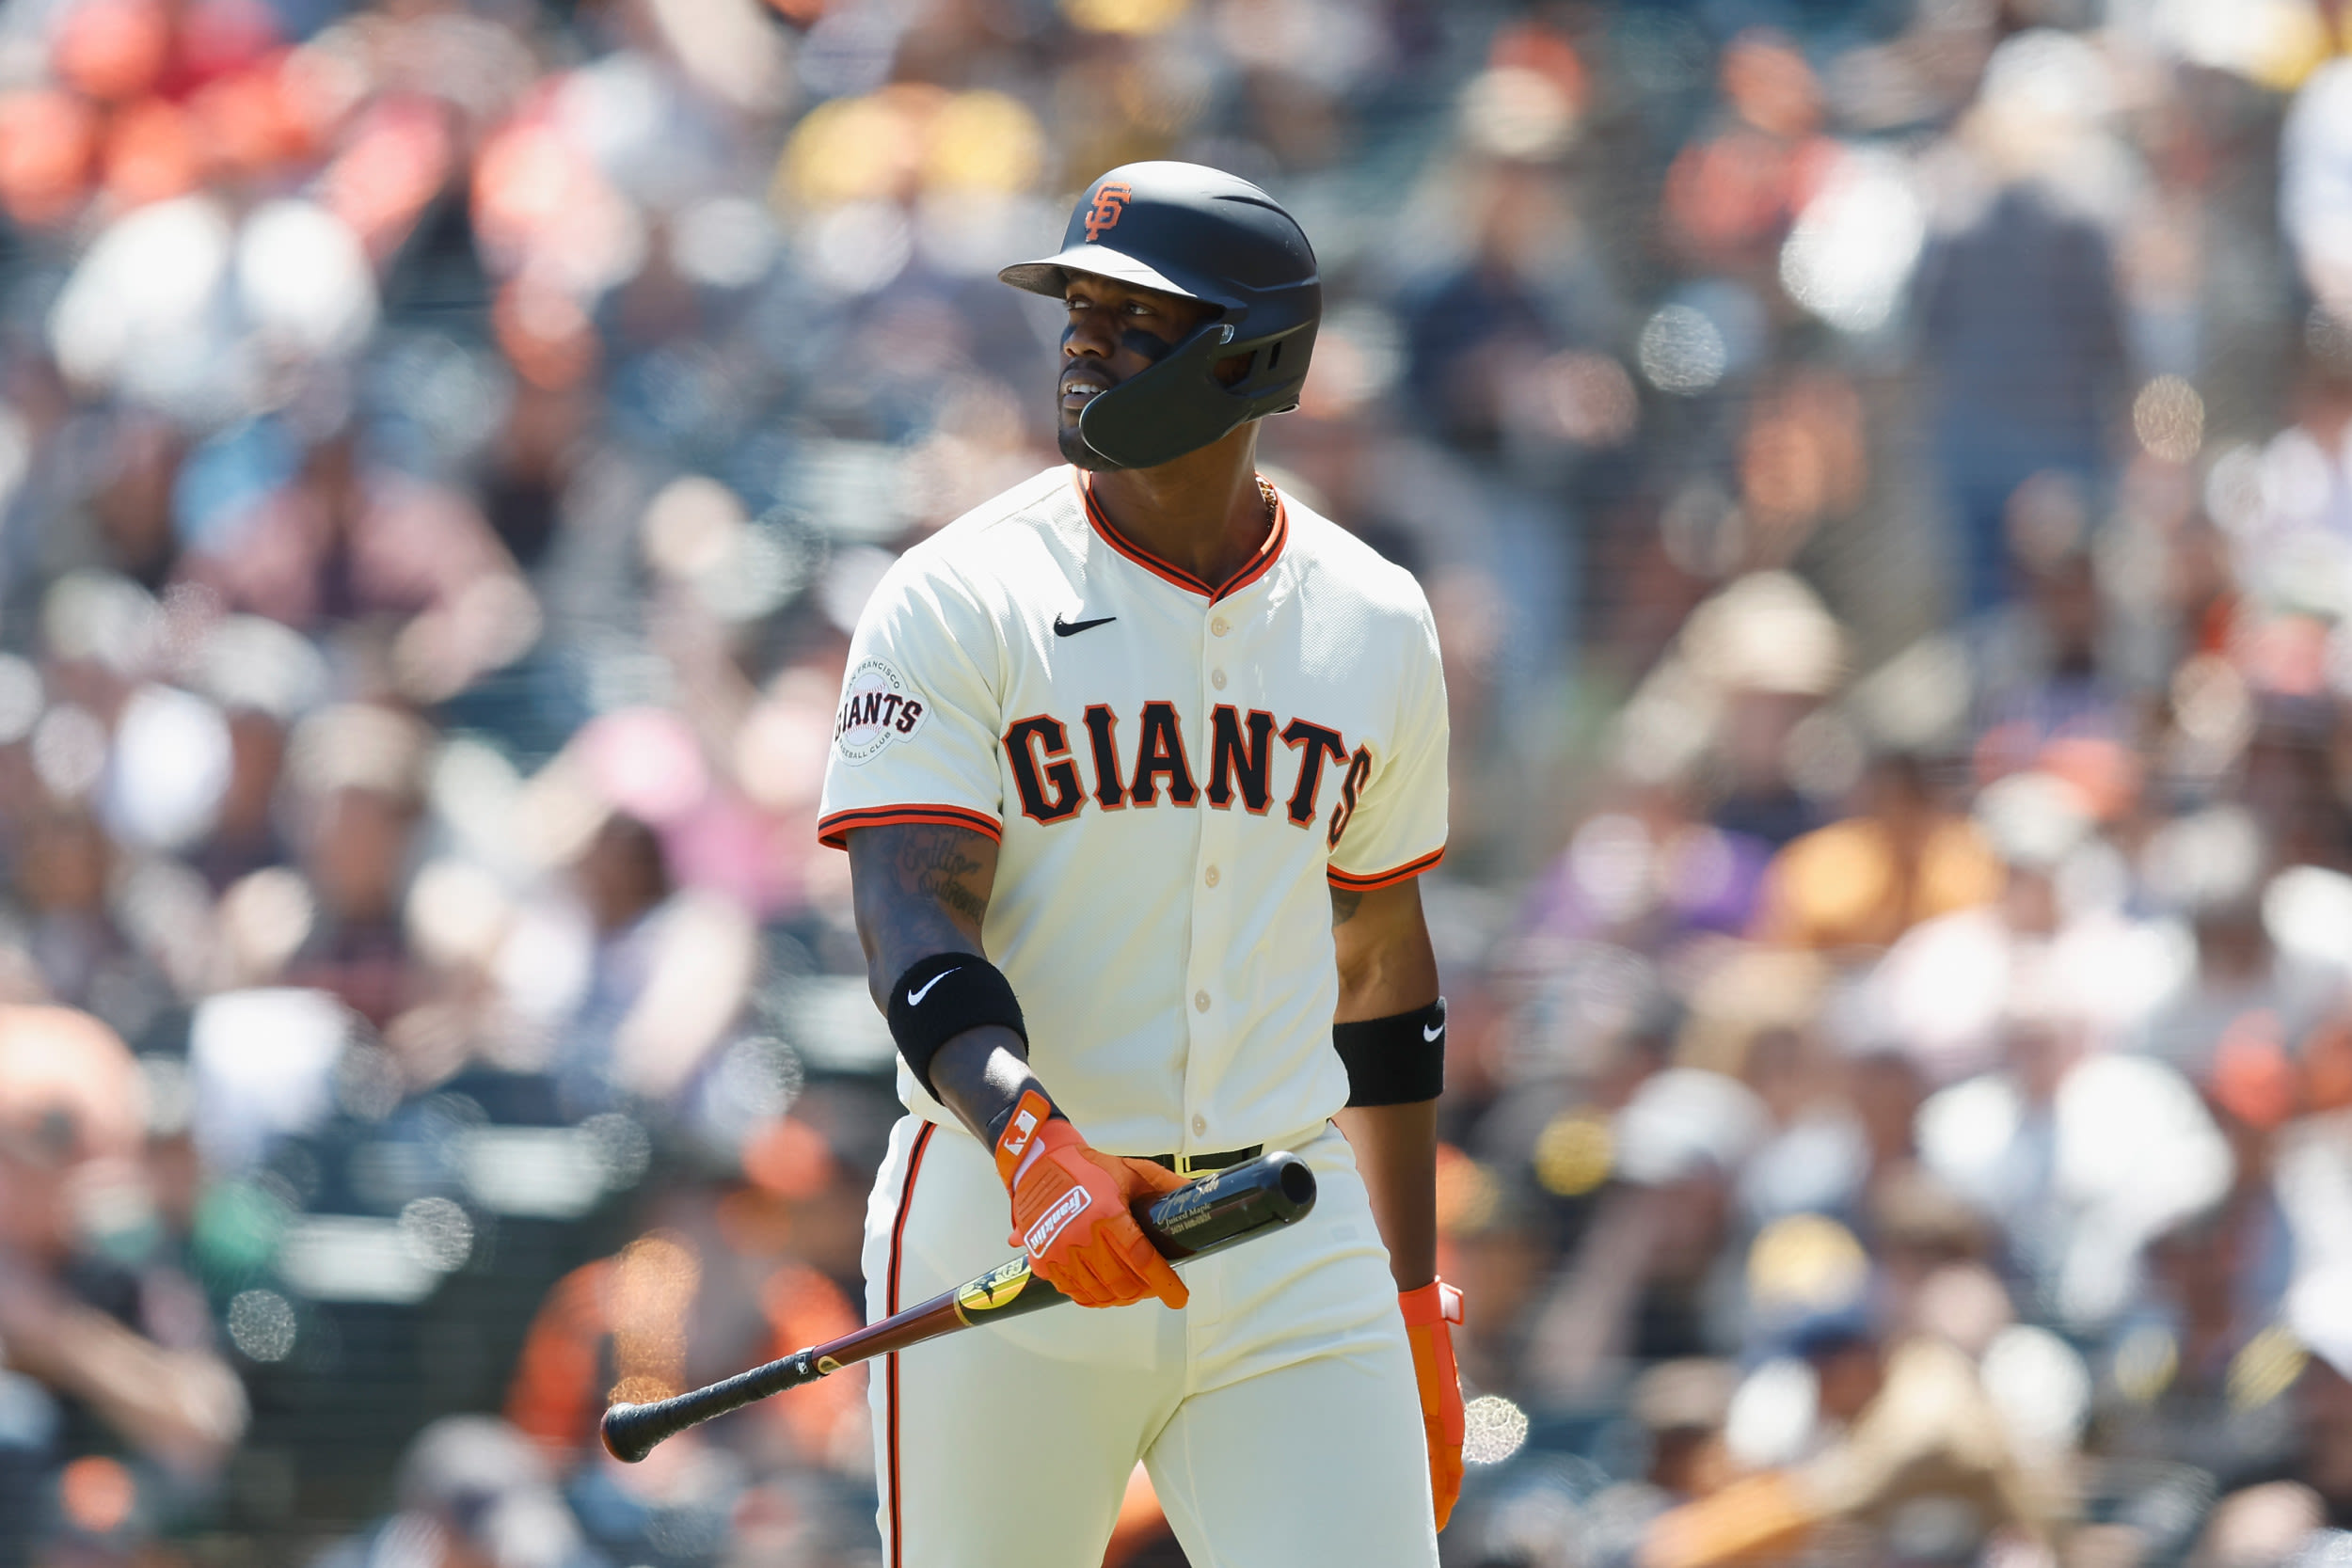 Injured Giants All-Star Gets Hurt Again While Taking Batting Practice